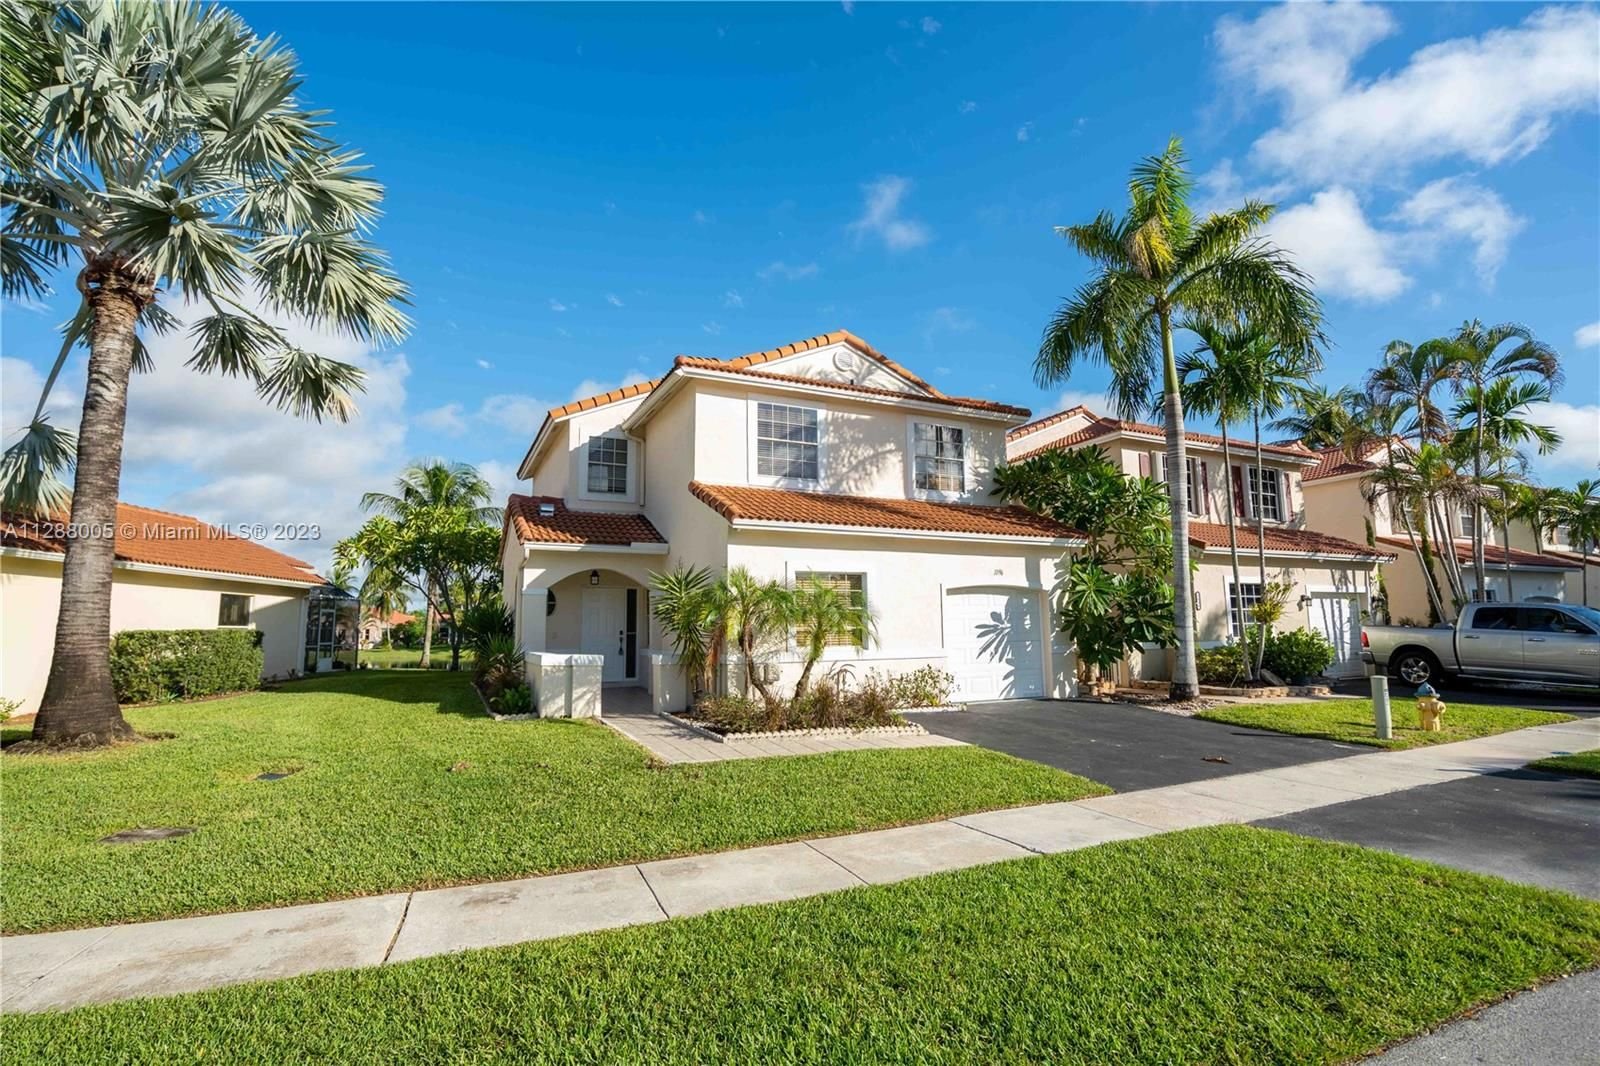 Real estate property located at 1096 180th Ter, Broward County, Pembroke Pines, FL